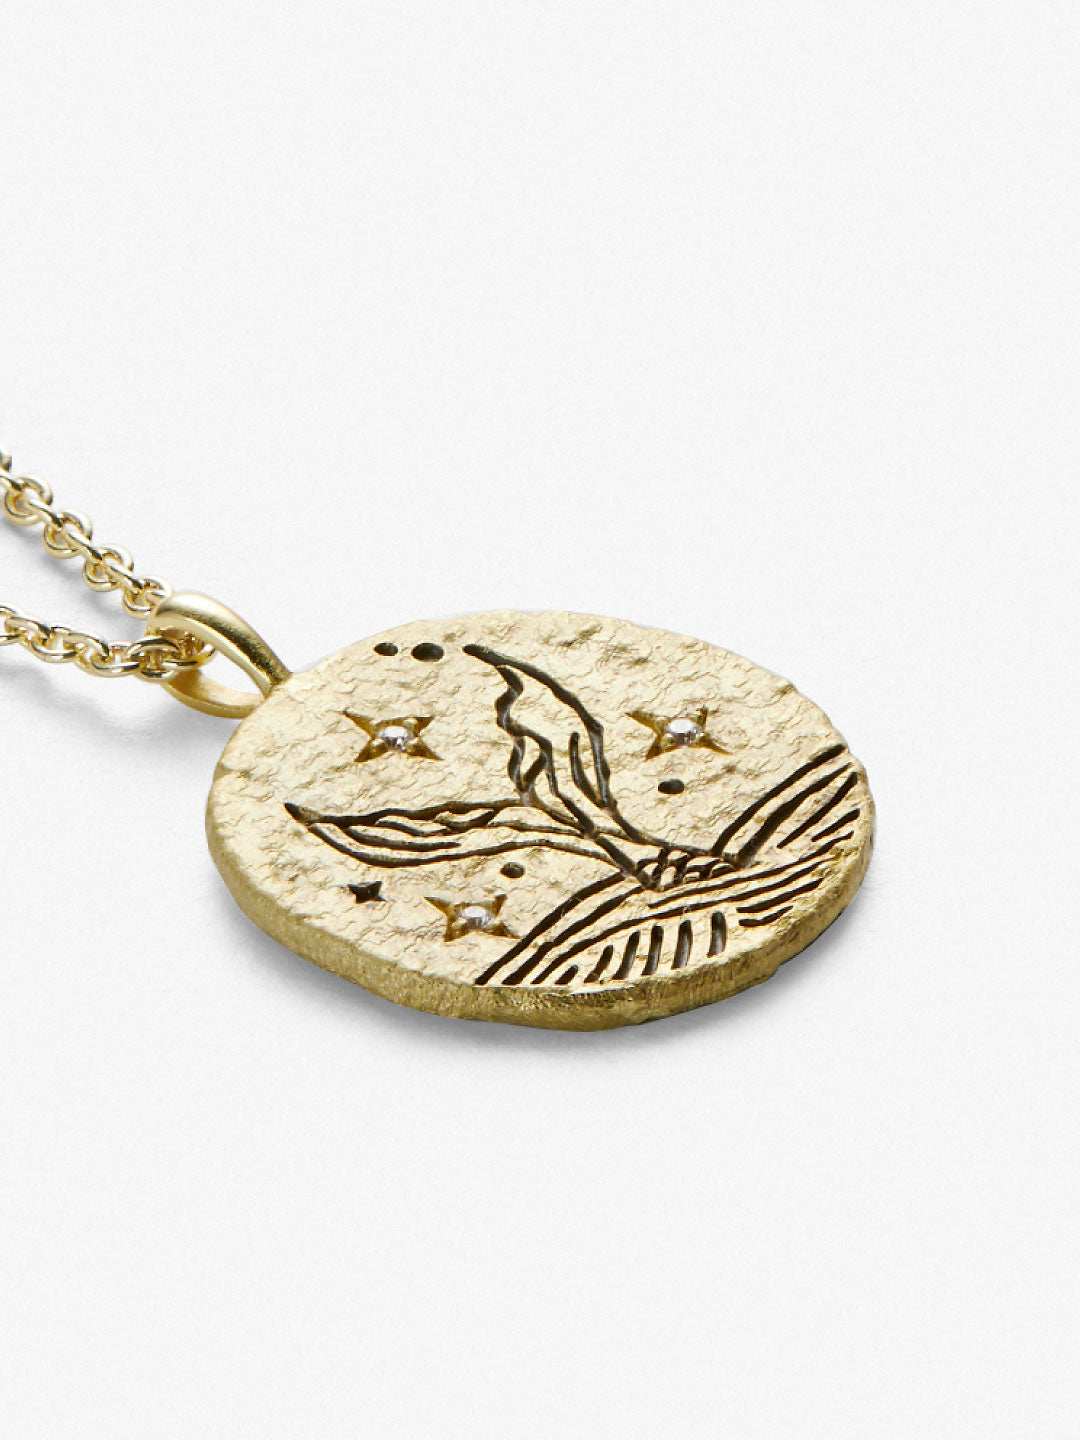 Ana Luisa Jewelry Necklaces Pendants Gold Coin Necklace Water Pendant Gold